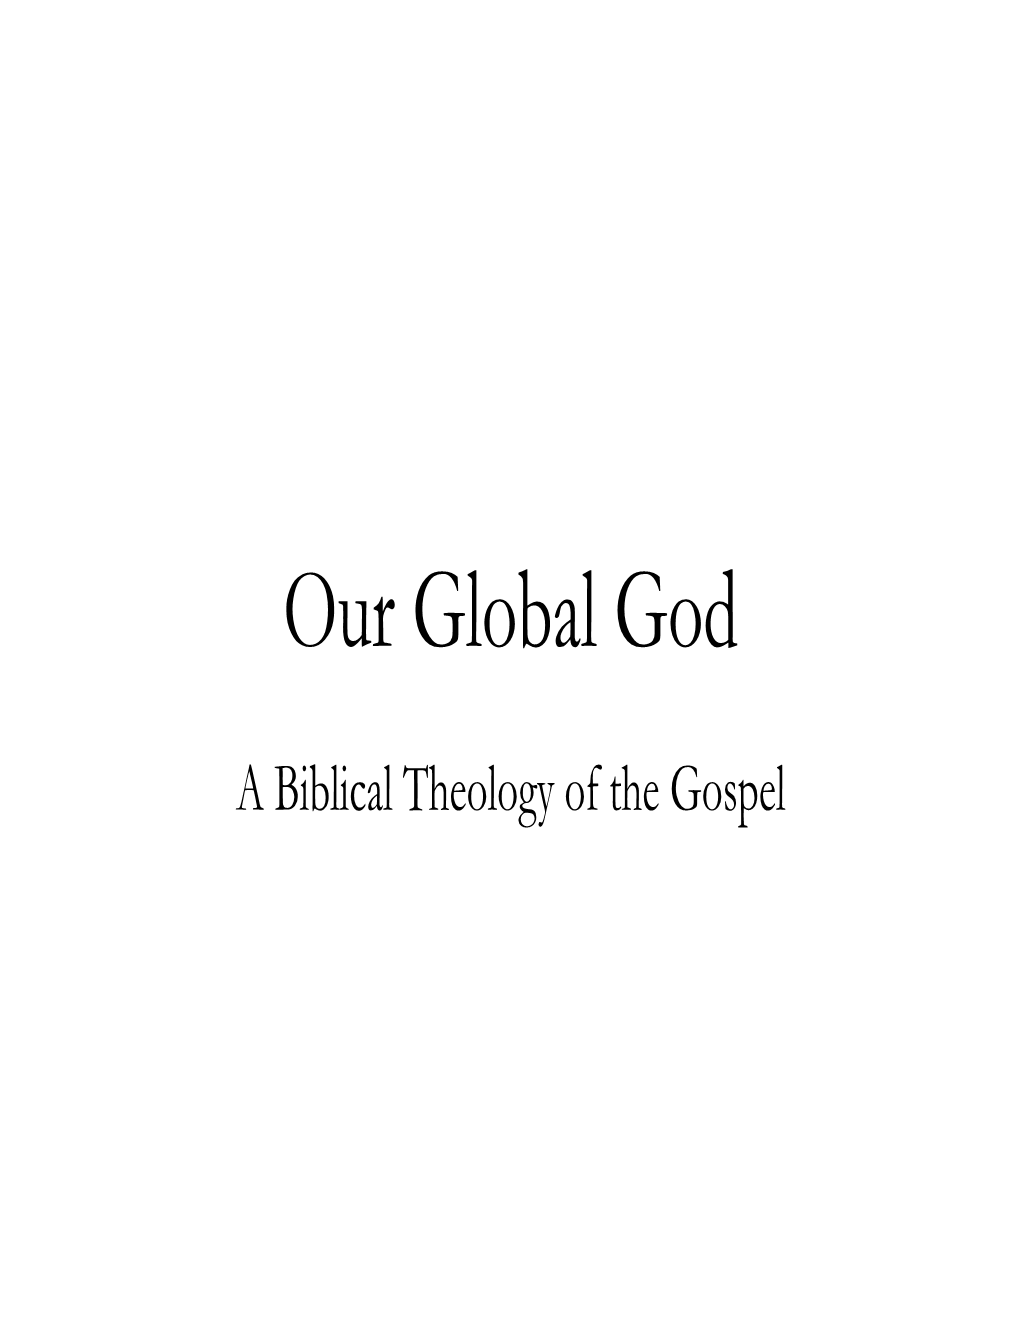 Our Global God: a Biblical Theology of the Gospel